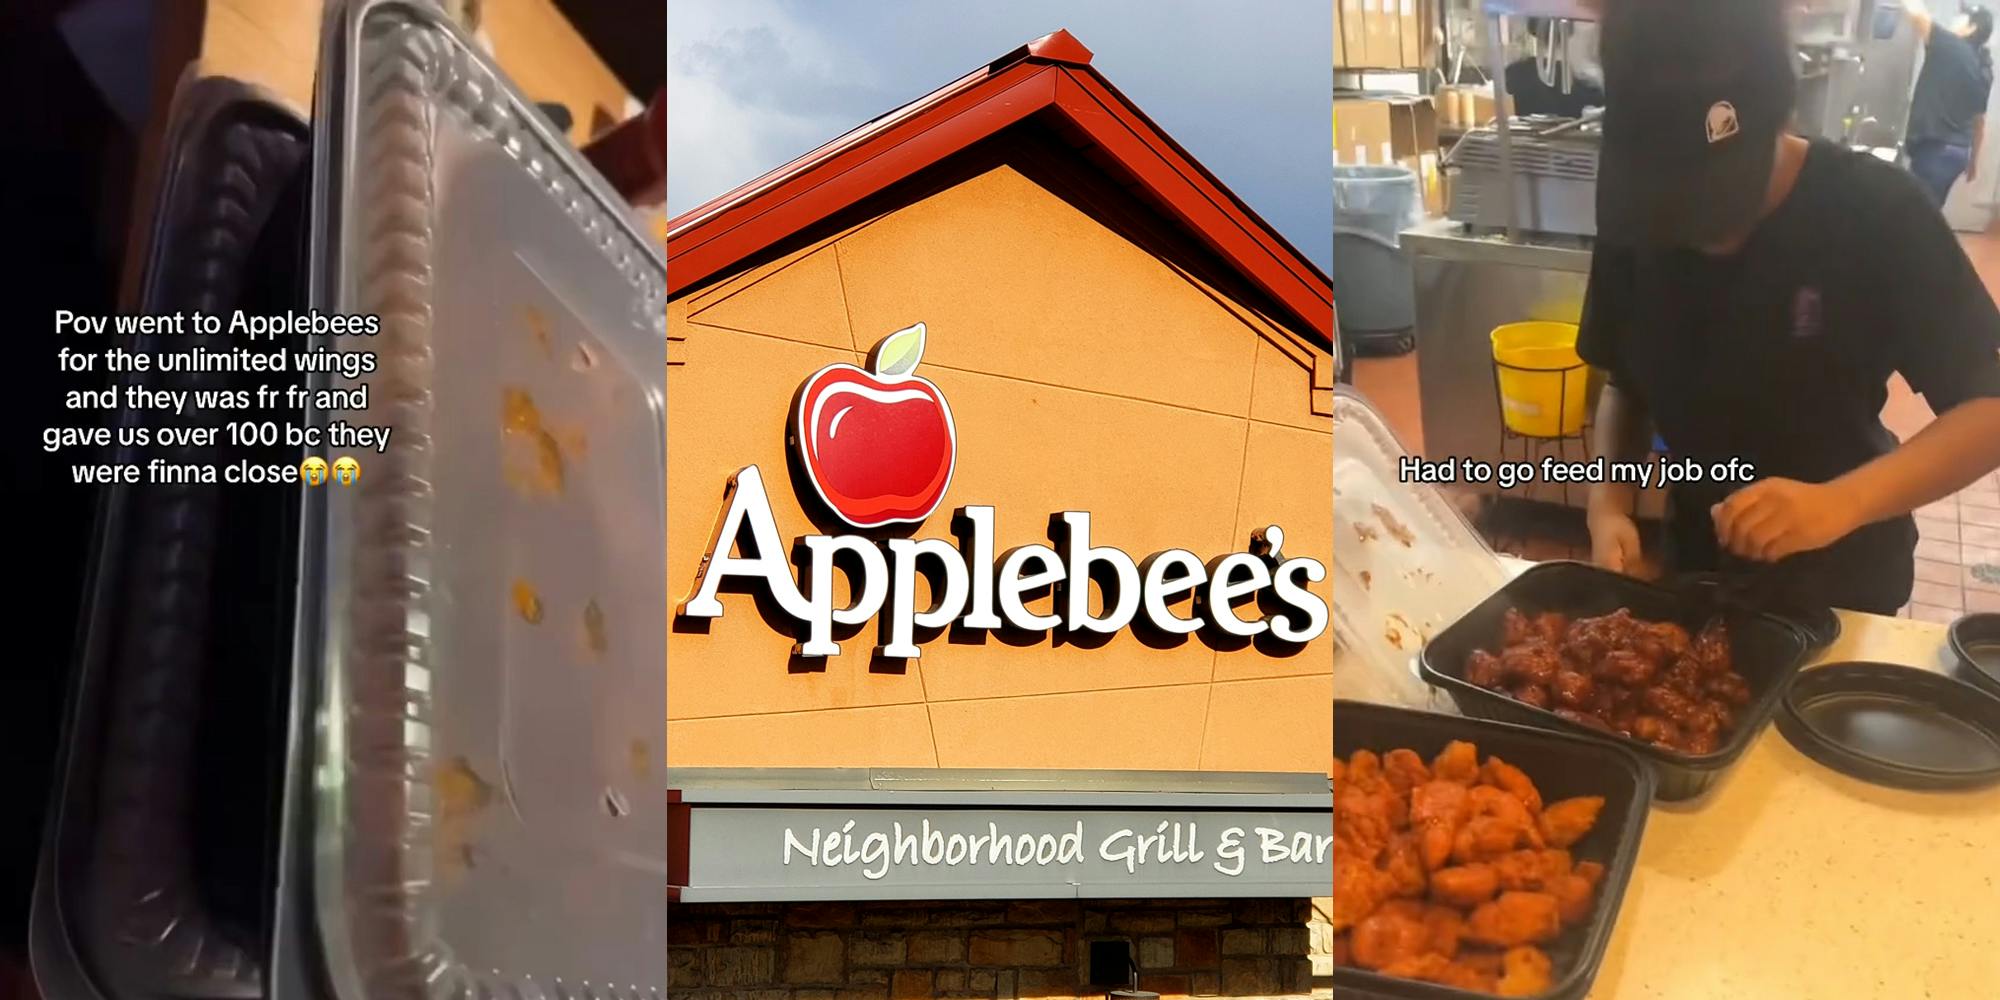 Applebee's wings with caption "Pov went to Applebees for the unlimited wings and they was fr fr and gave us over 100 bc they were finna close" (l) Applebee's sign on building (c) worker getting Applebee's wings with caption "Had to go feed my job ofc" (r)